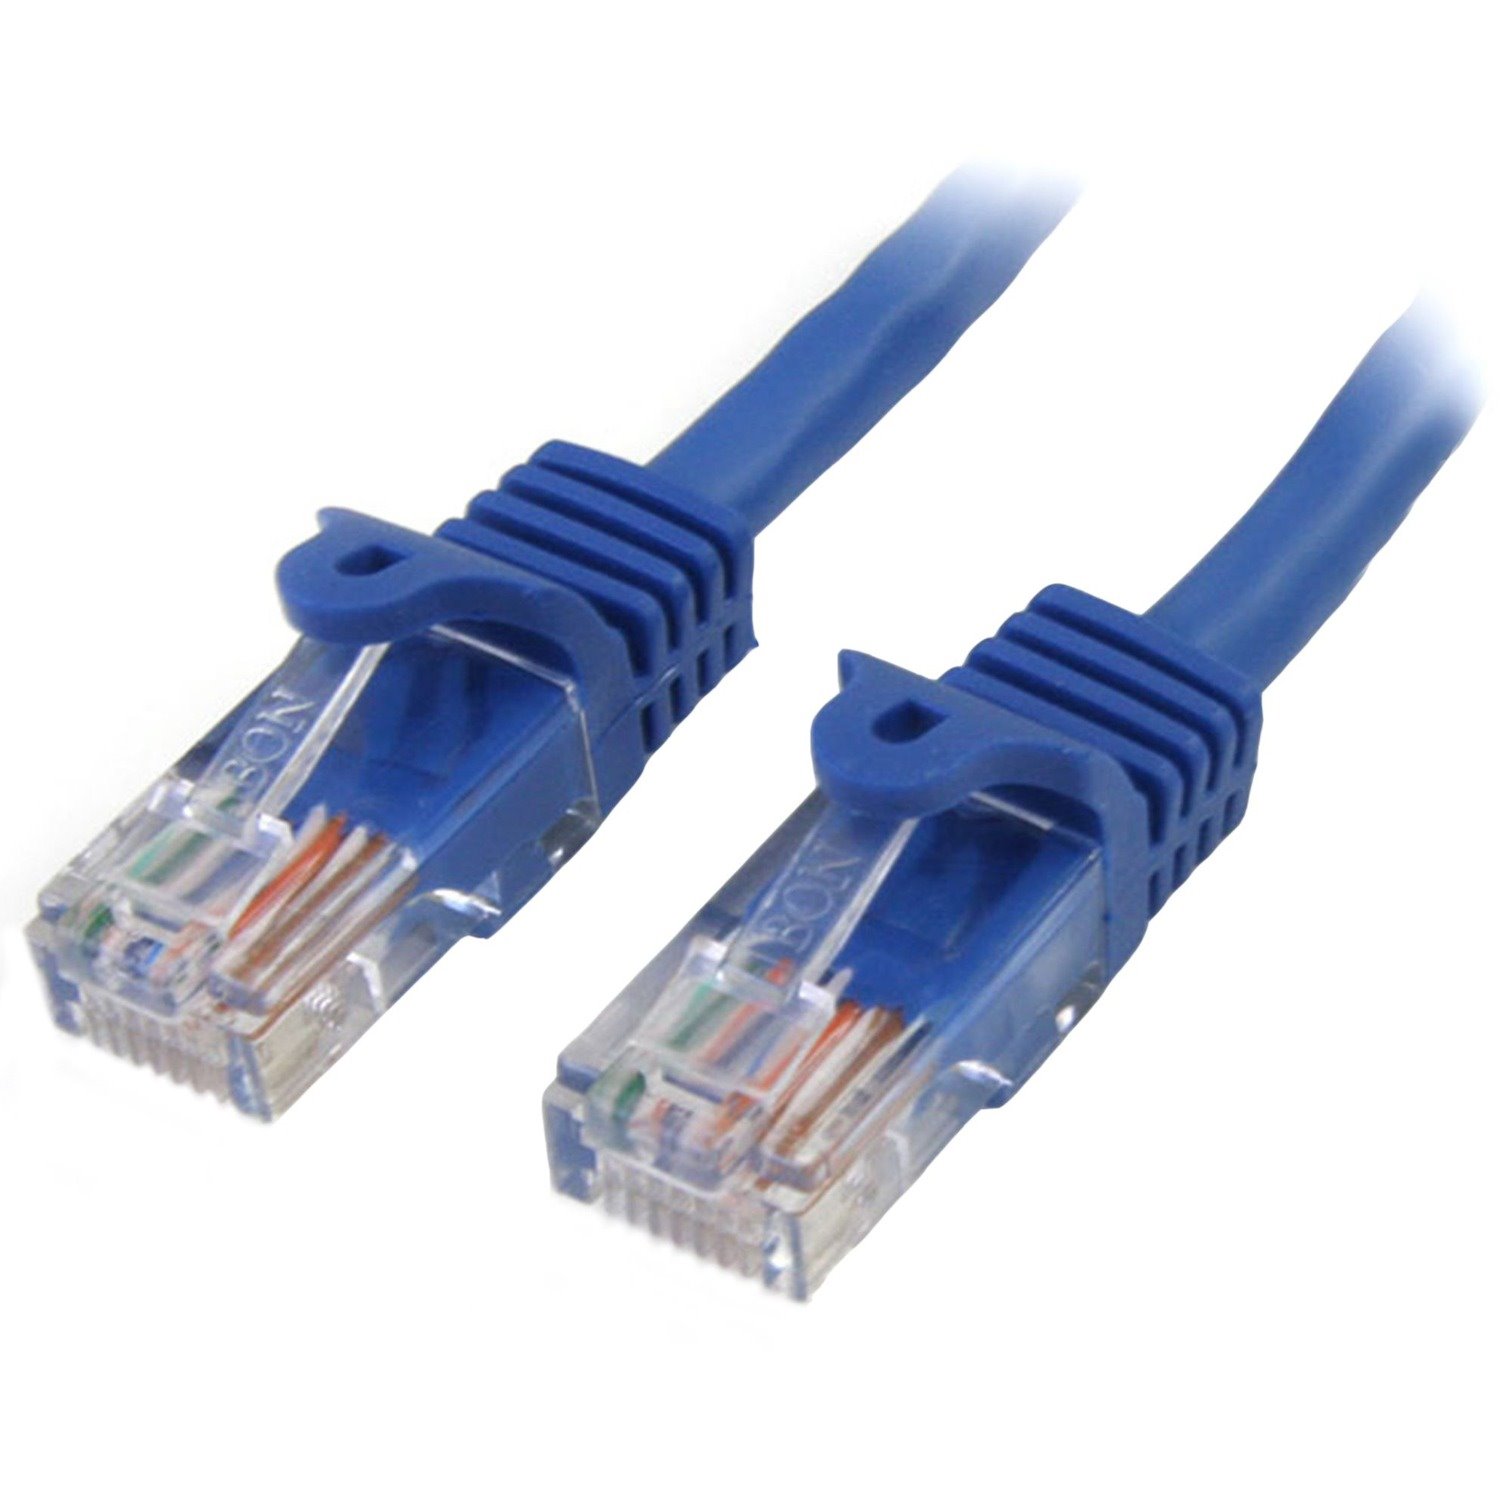 StarTech.com 2 m Blue Cat5e Snagless RJ45 UTP Patch Cable - 2m Patch Cord - Ethernet Patch Cable - RJ45 Male to Male Cat 5e Cable